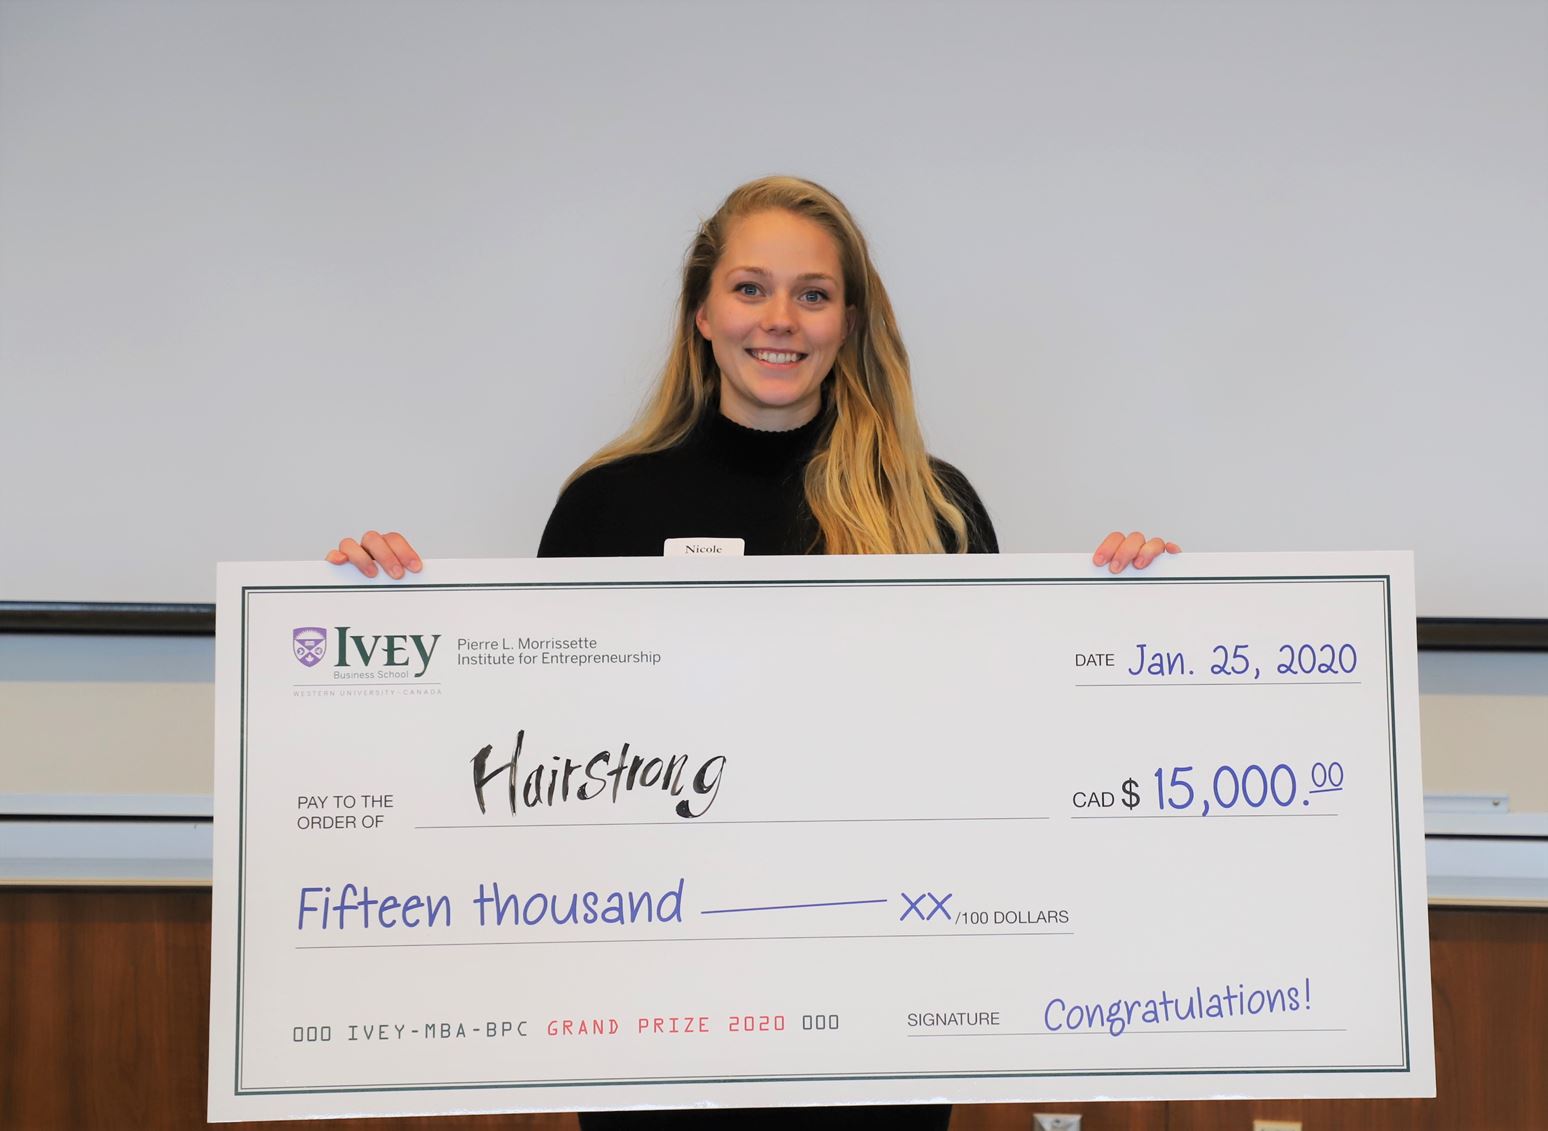 Hairstrong wins the 2020 Ivey MBA Business Plan Competition